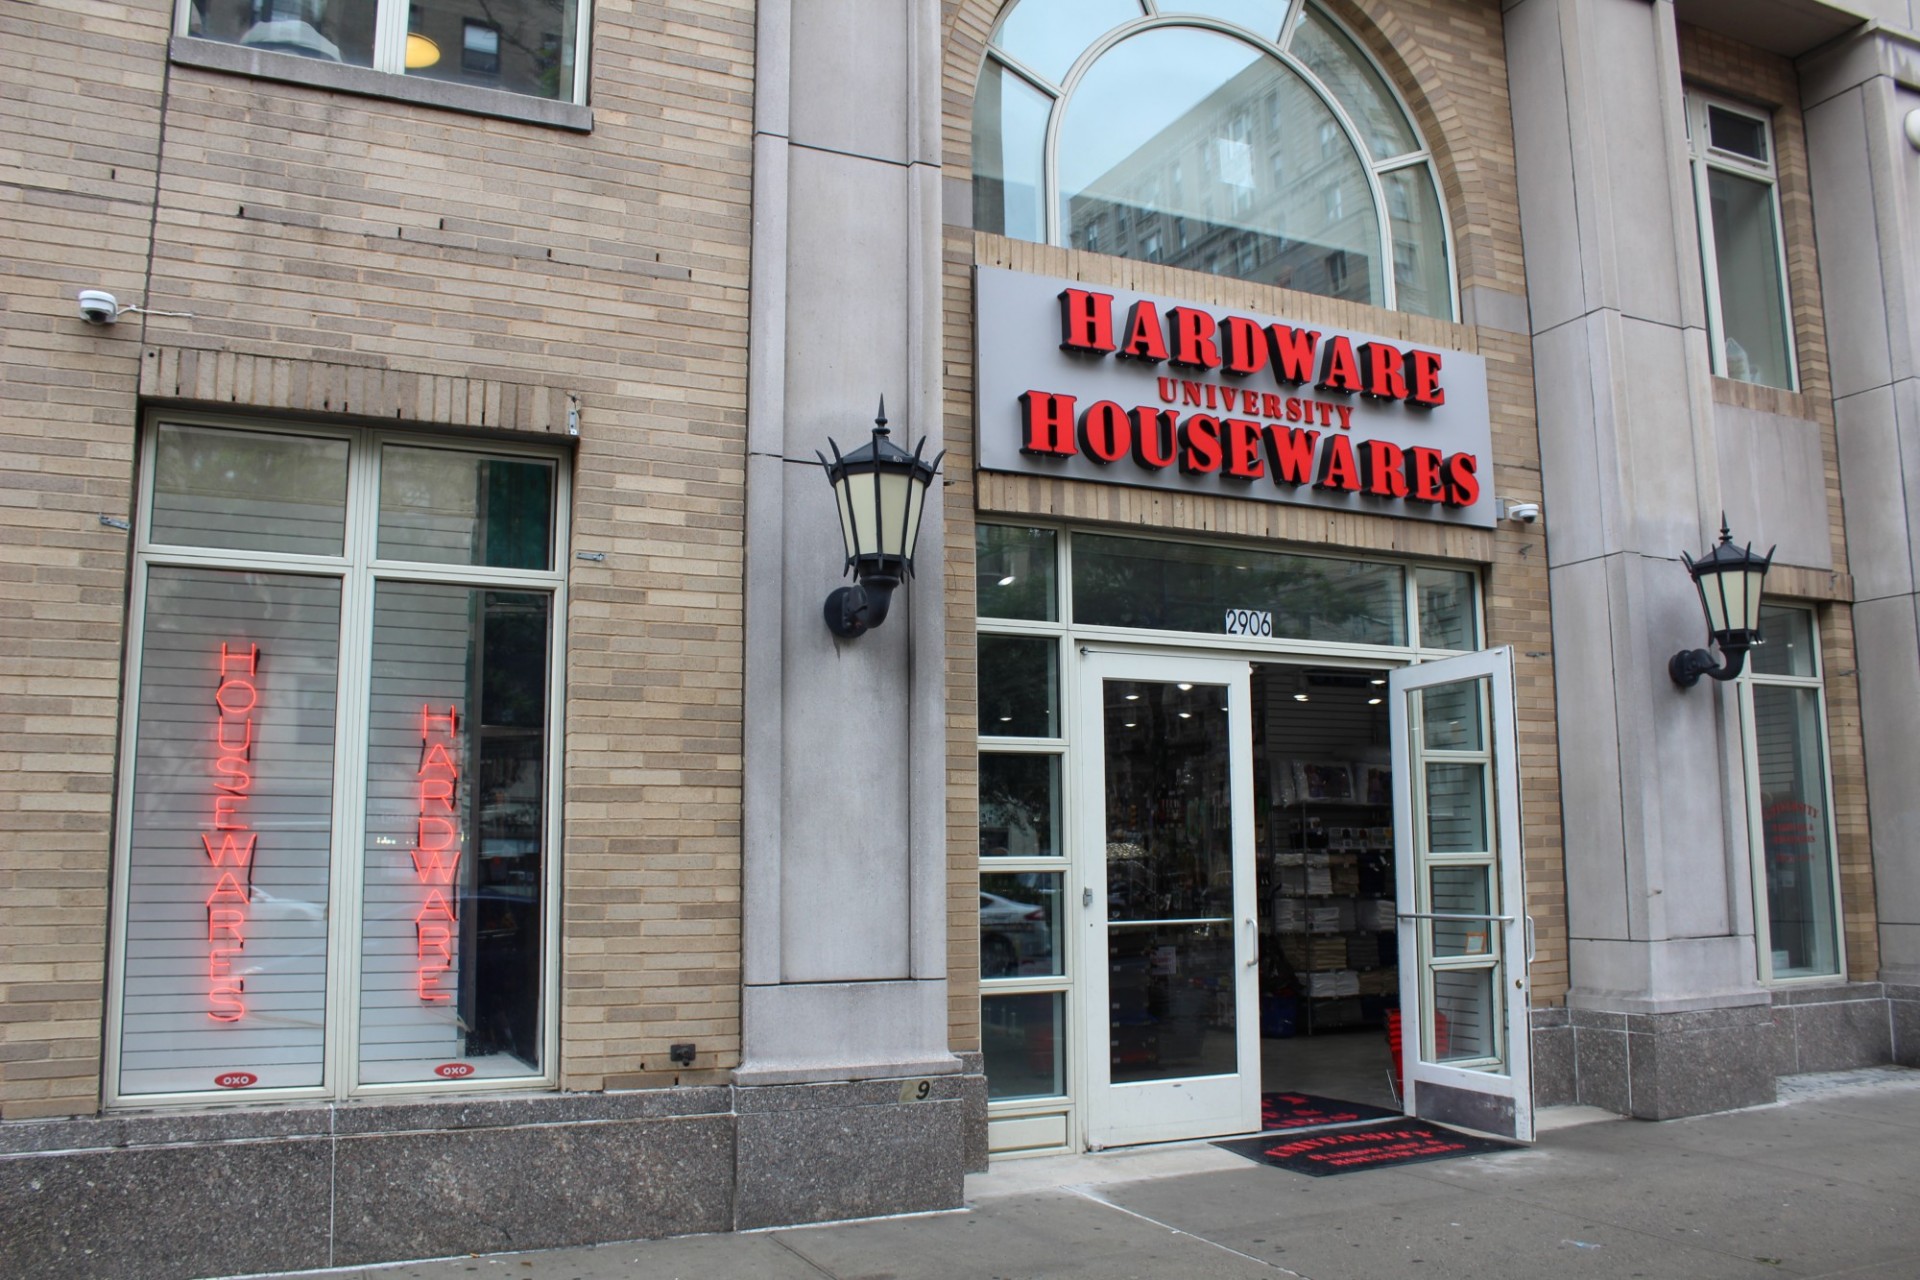 The storefront of University Hardware and Housewares with a large red sign and open glass doors.